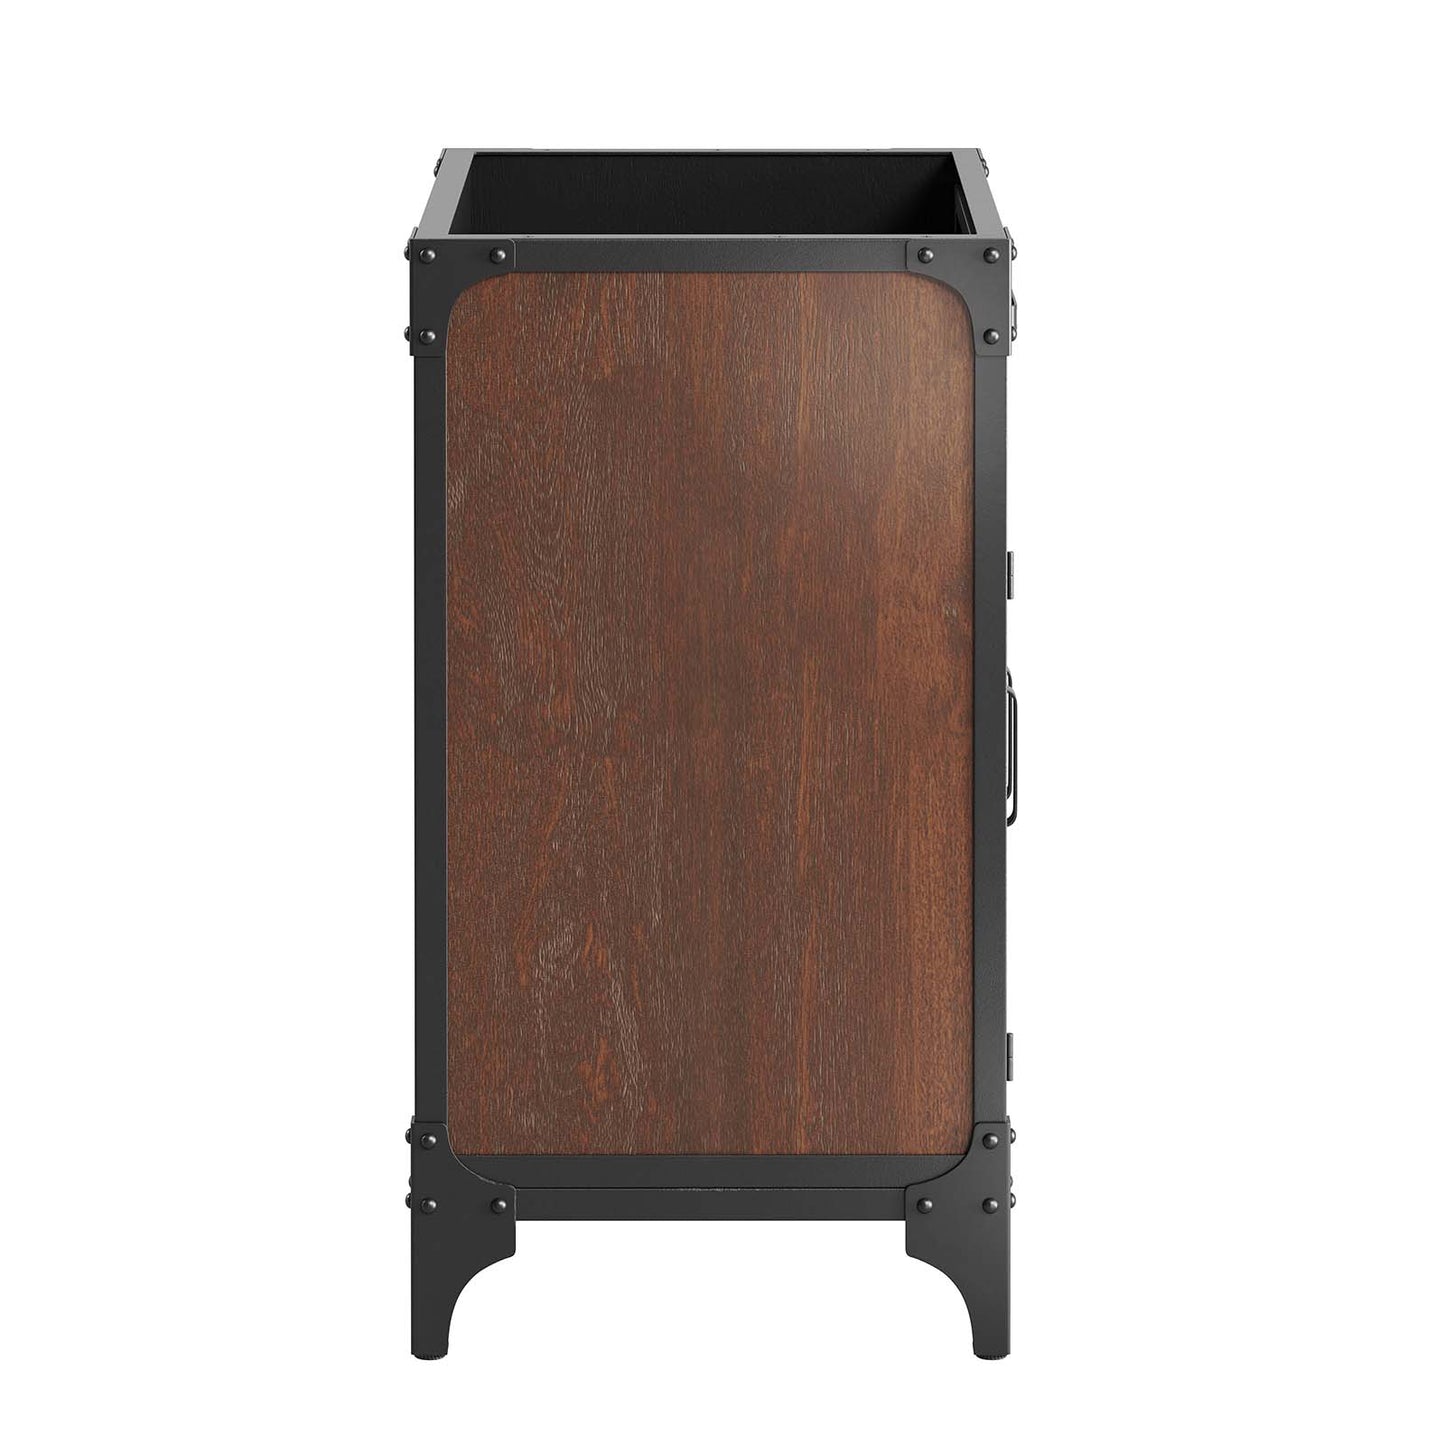 Steamforge 24" Bathroom Vanity Cabinet (Sink Basin Not Included) By Modway - EEI-6127 | Bathroom Accessories | Modway - 2